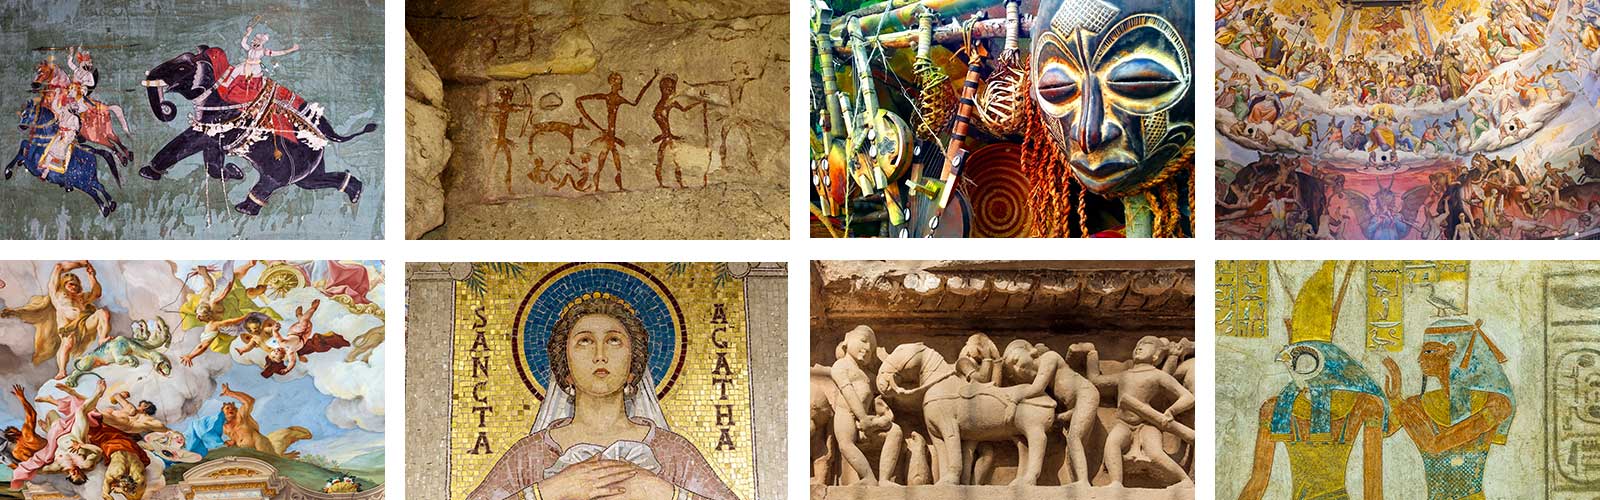 A selection of historical art from a variety of cultures